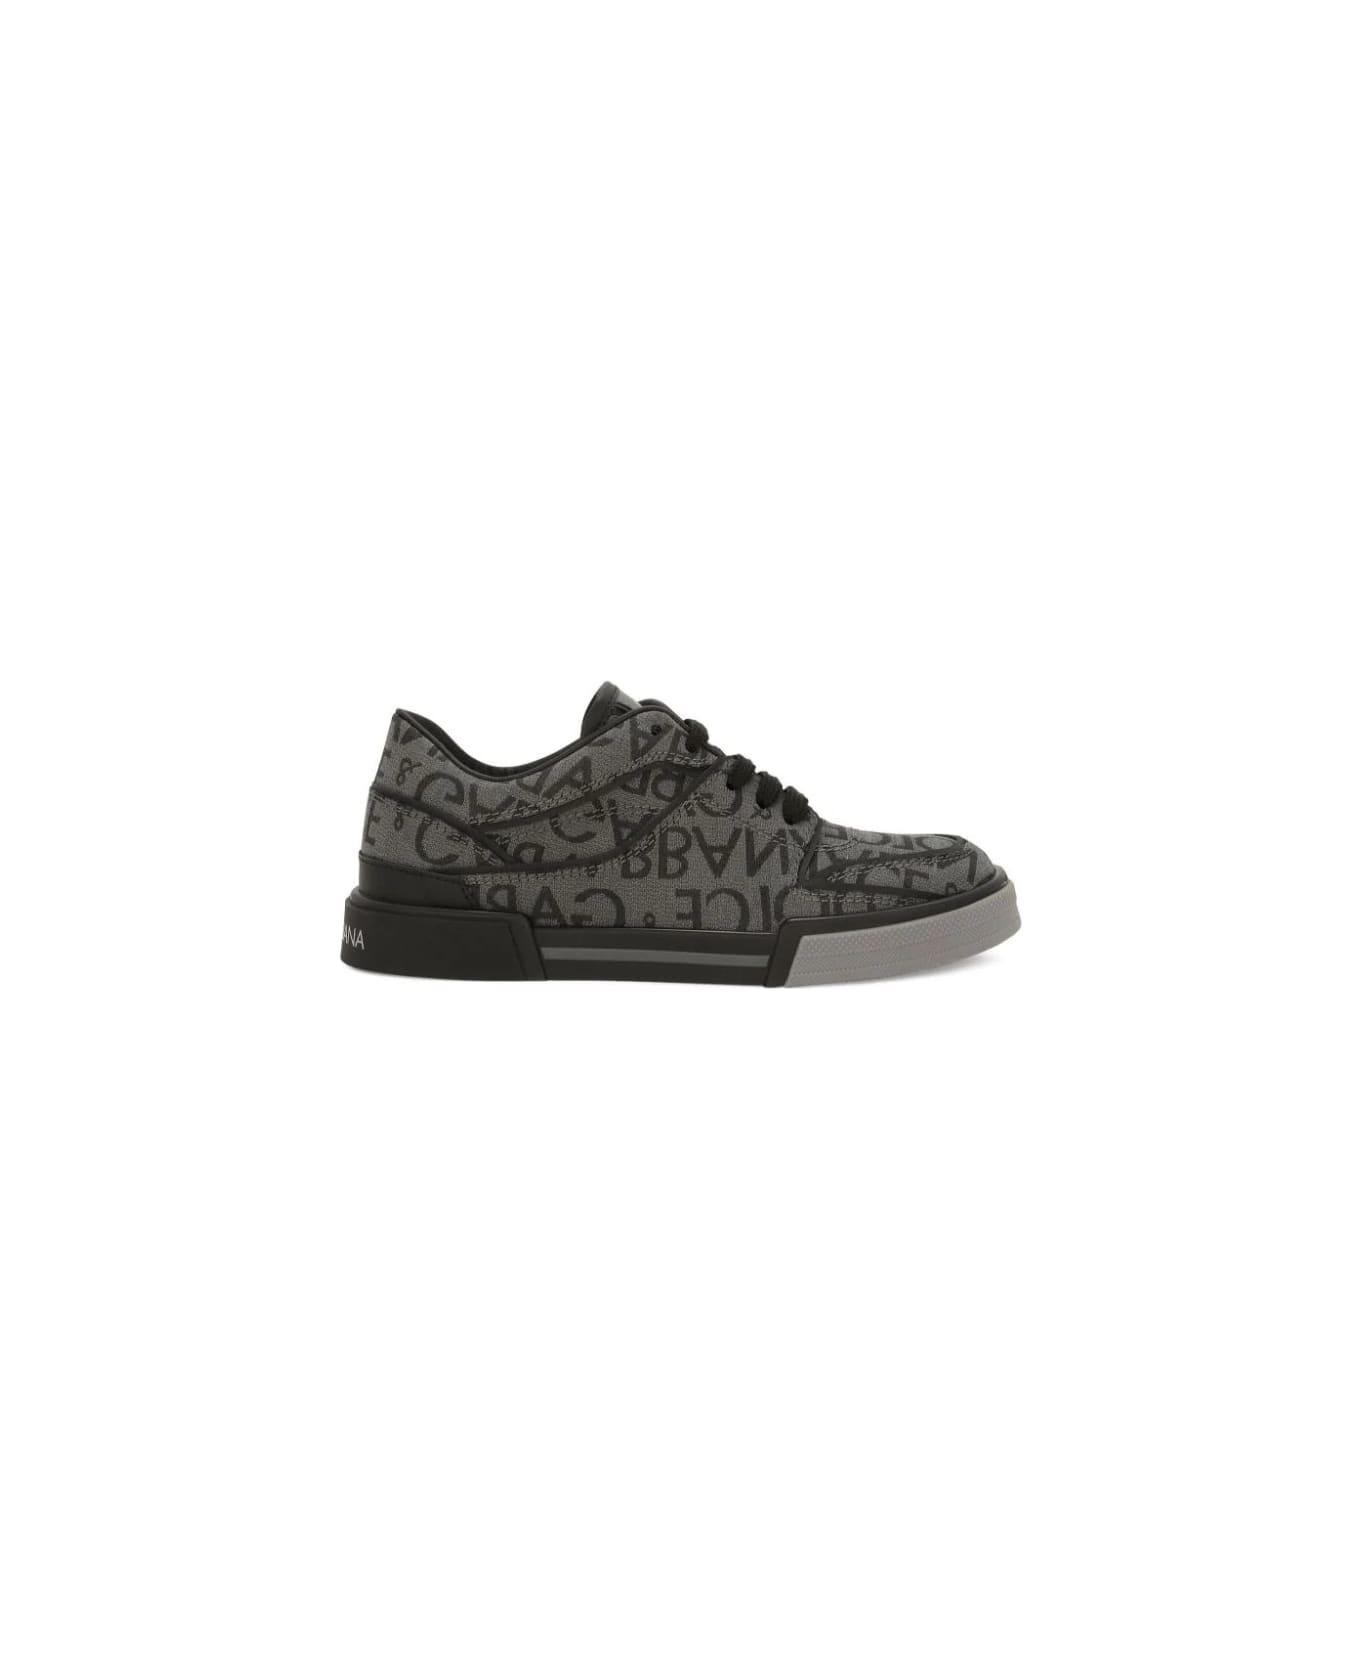 Dolce & Gabbana Grey New Roma Sneakers In Calf Leather - Grey シューズ